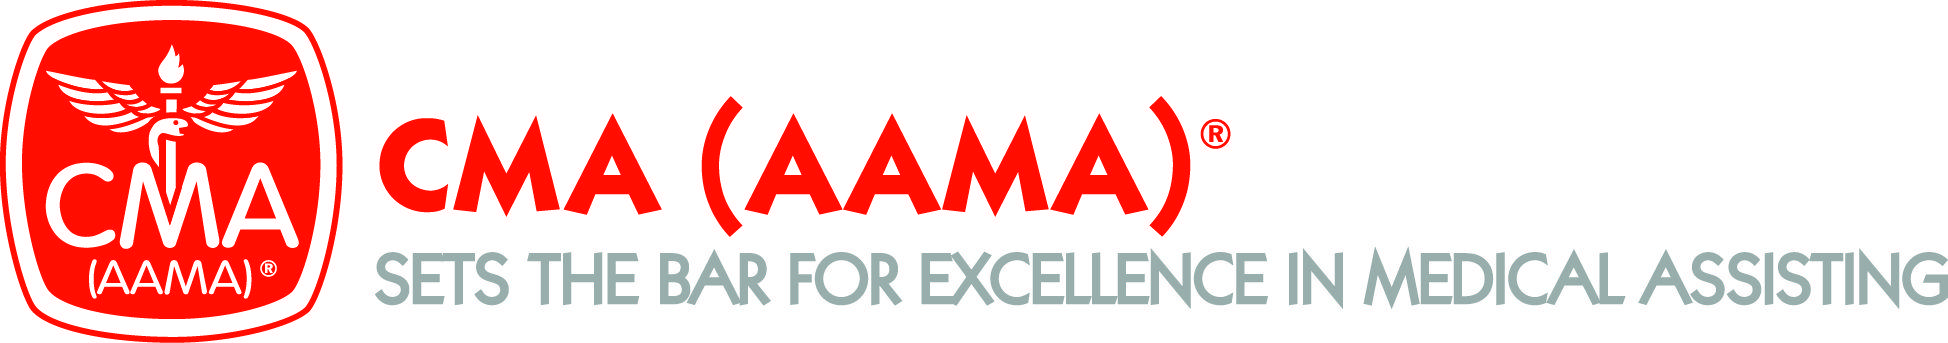 Medical Assistant Logo - AAMA Official Site - American Association of Medical Assistants